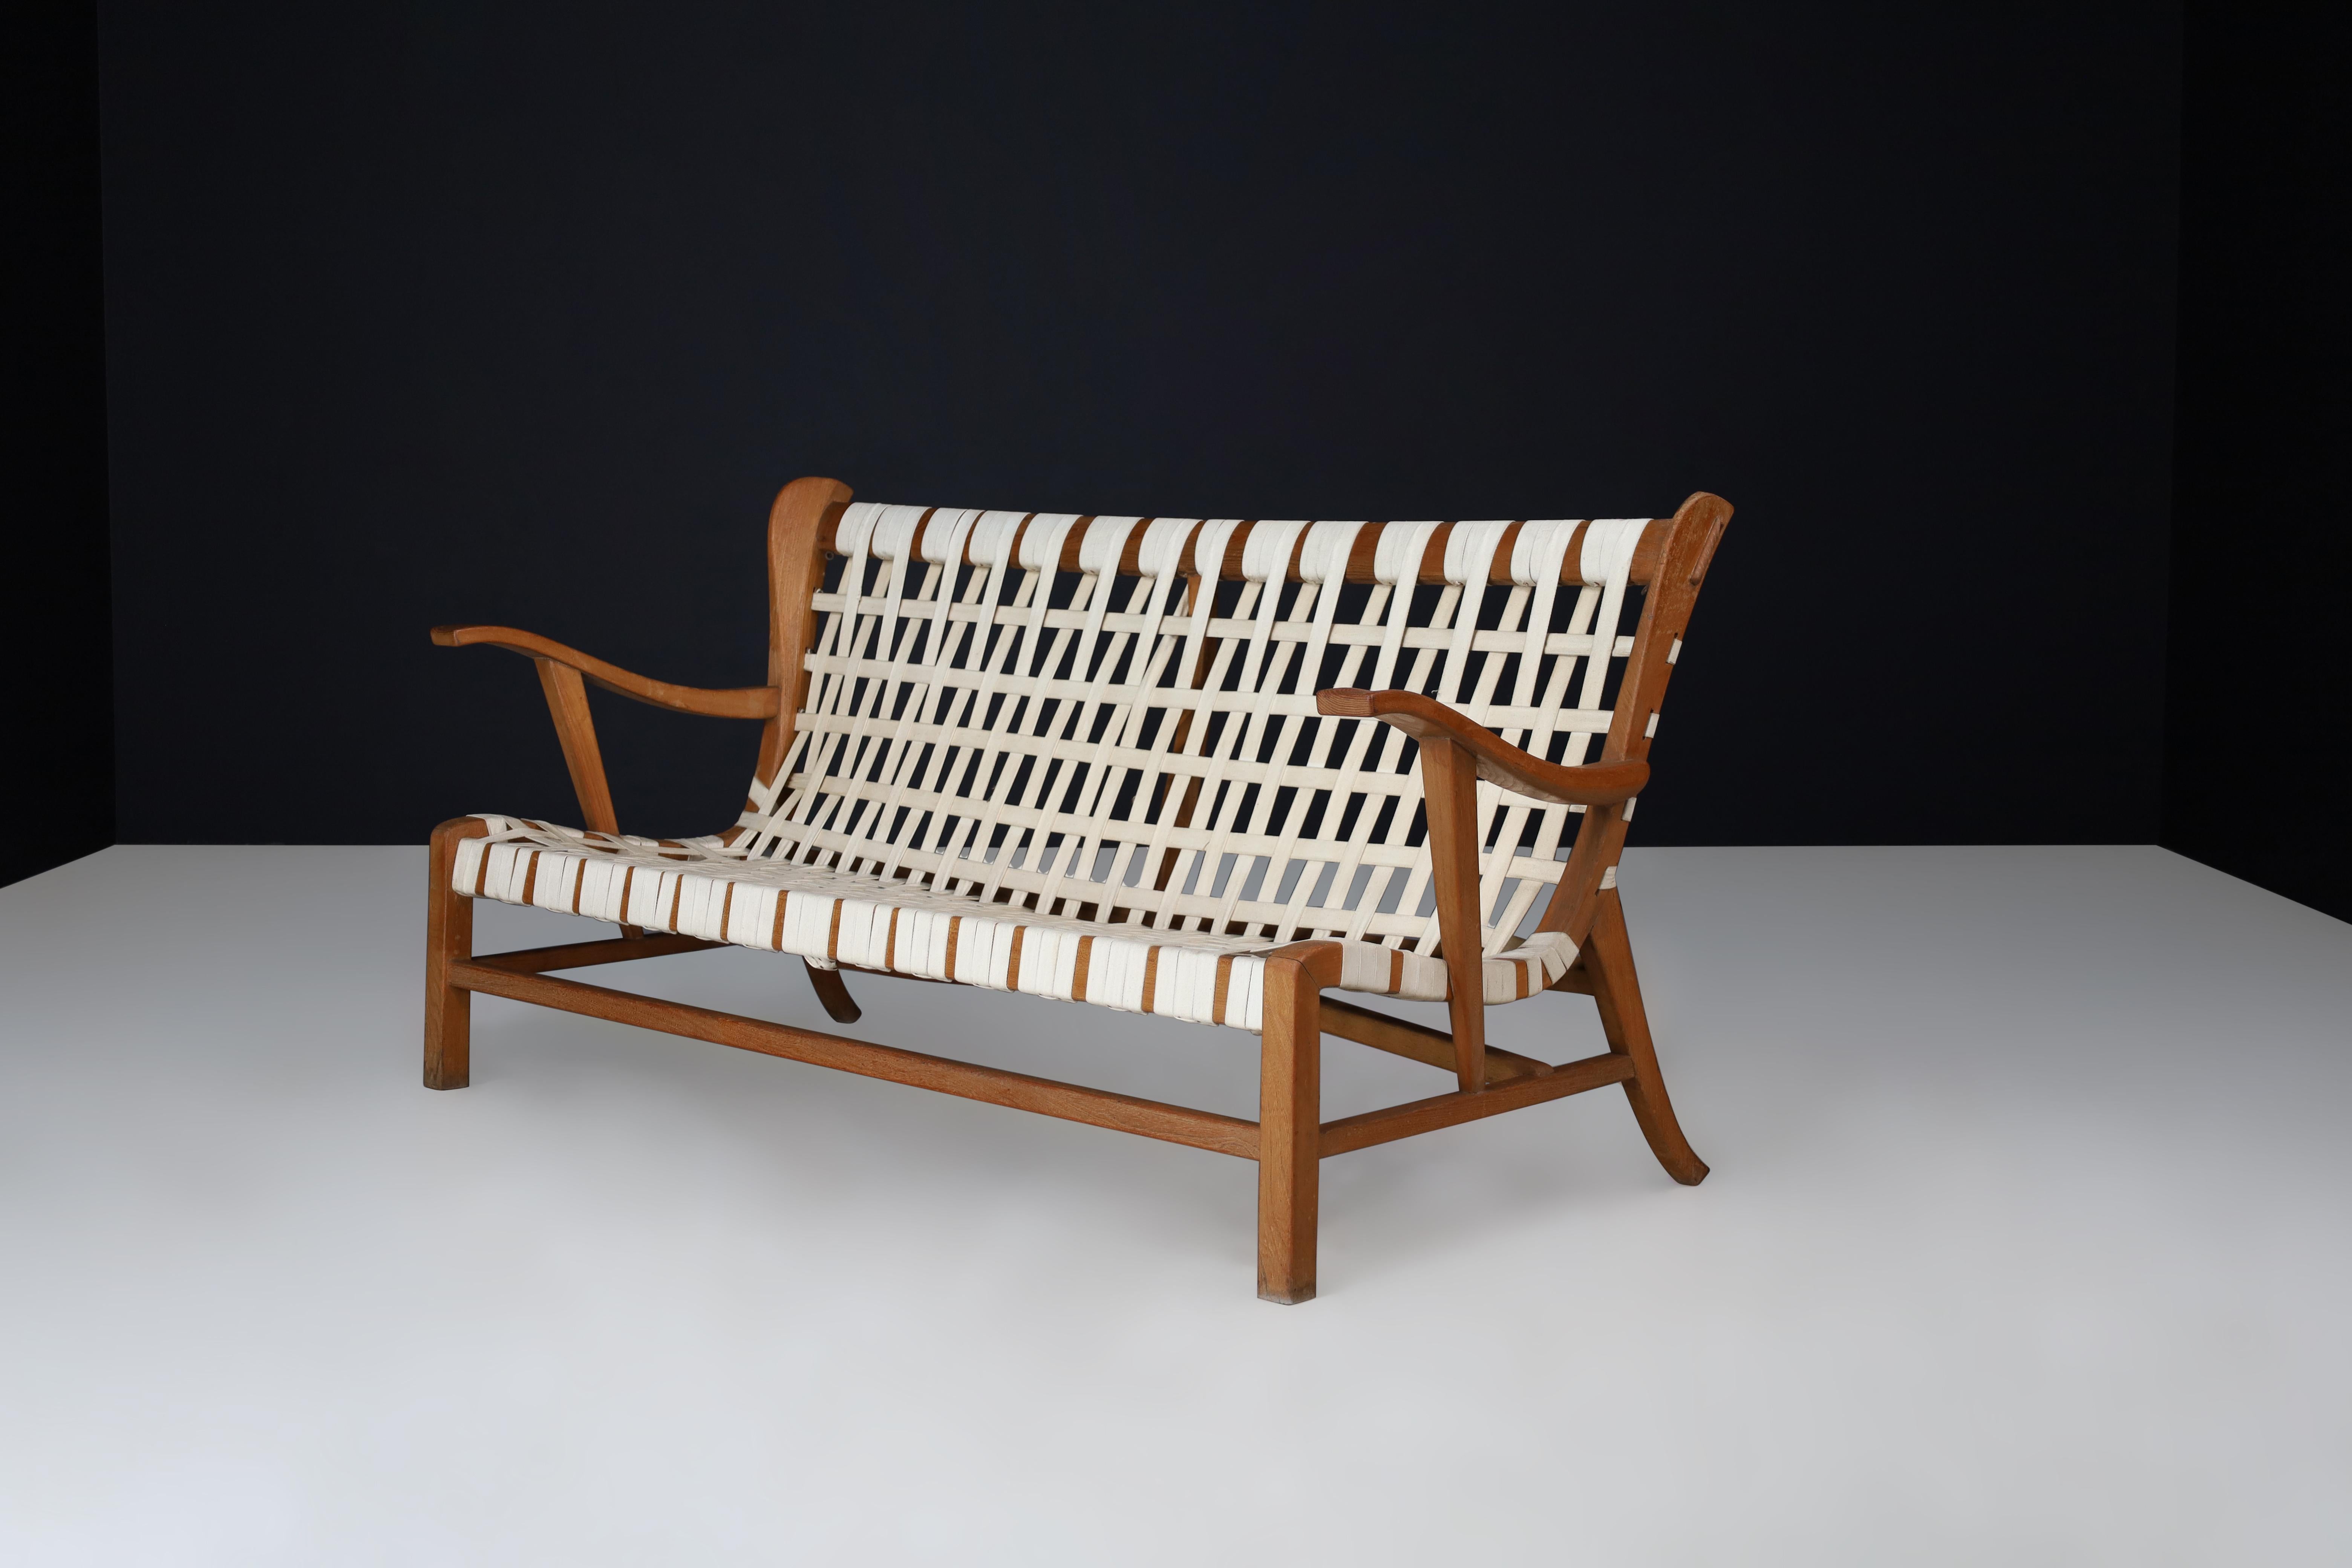 Sculptural oak Lounge Sofa by Guglielmo Pecorini, Italy, the 1950s

This describes a midcentury sculptural sofa designed by Guglielmo Pecorini in the 1950s. The sofa is made with an oak frame and linen straps, exhibiting signs of aging and use, but